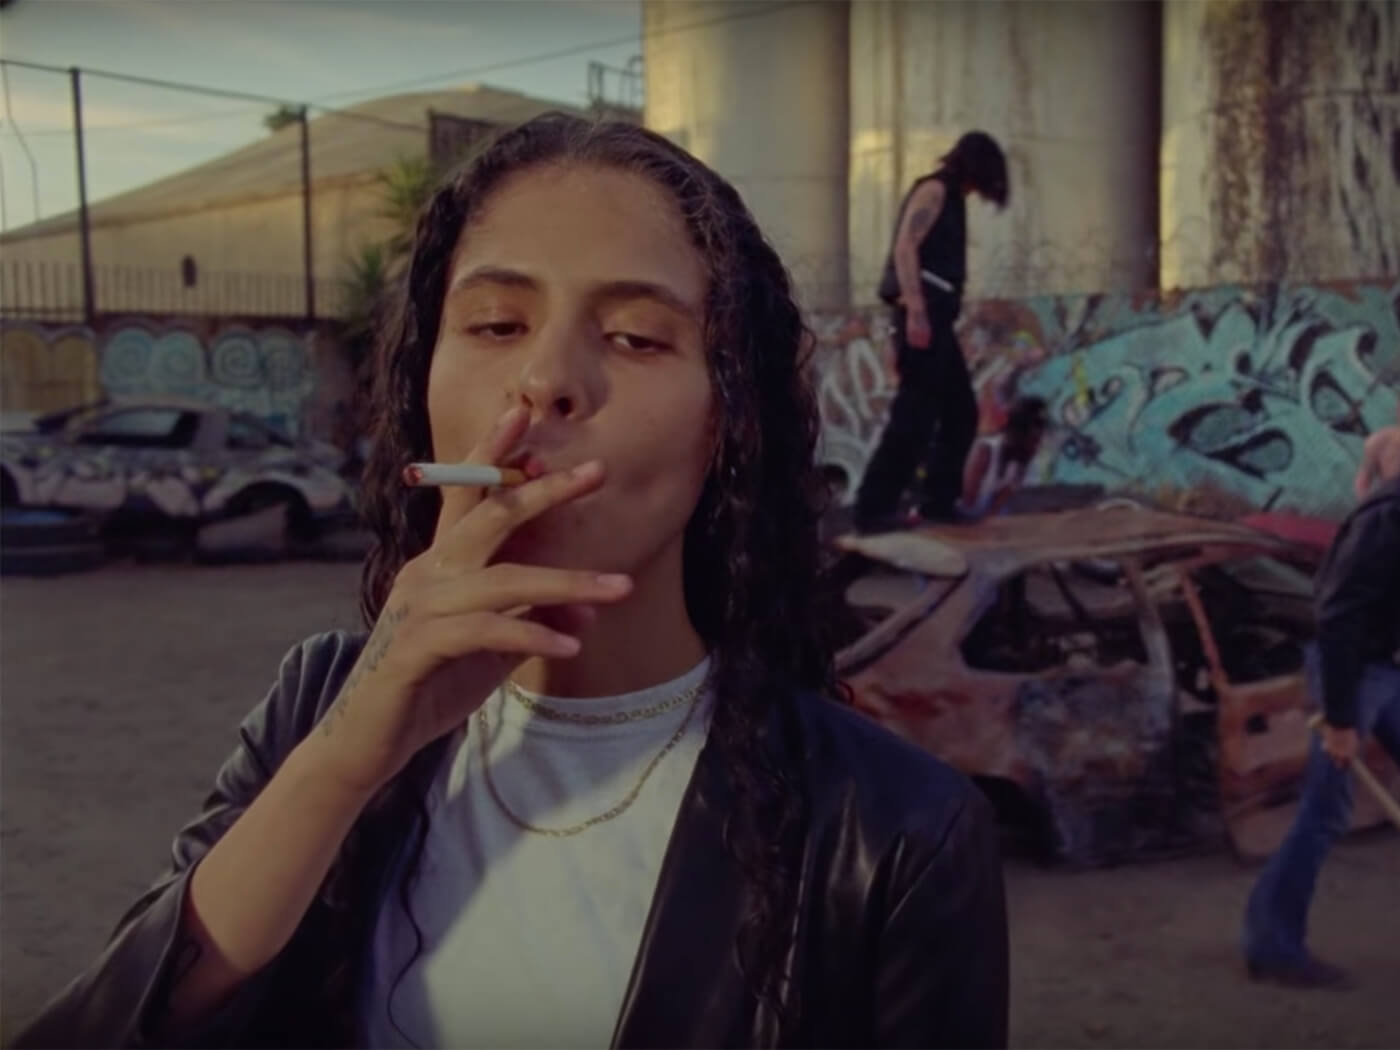 Shake faces her “Guilty Conscience” in new video